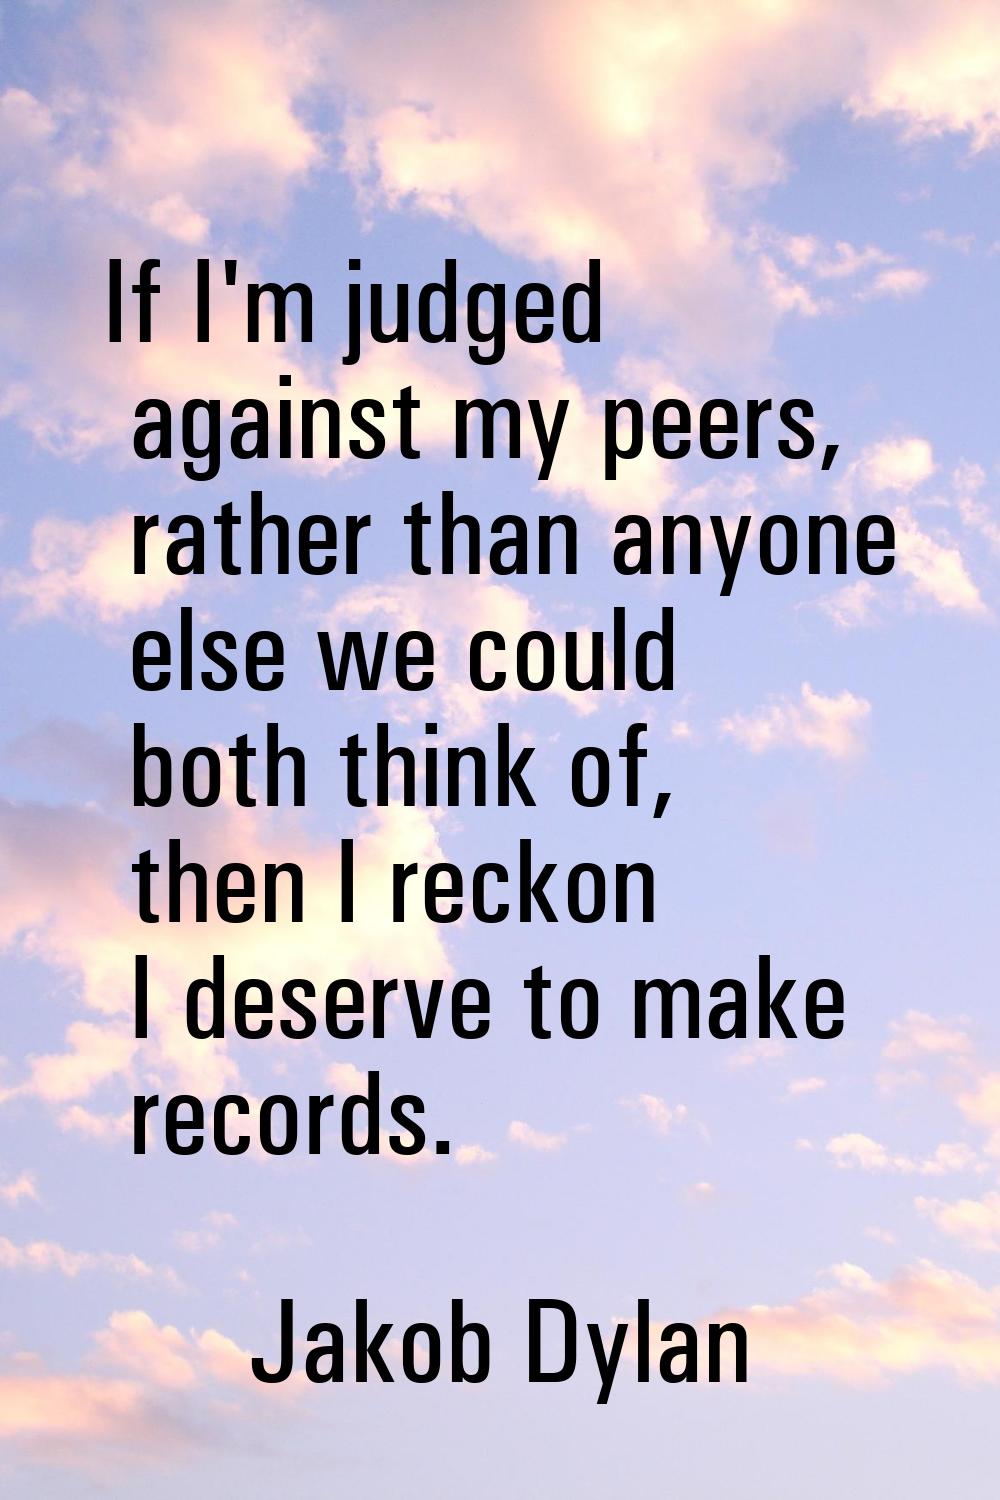 If I'm judged against my peers, rather than anyone else we could both think of, then I reckon I des